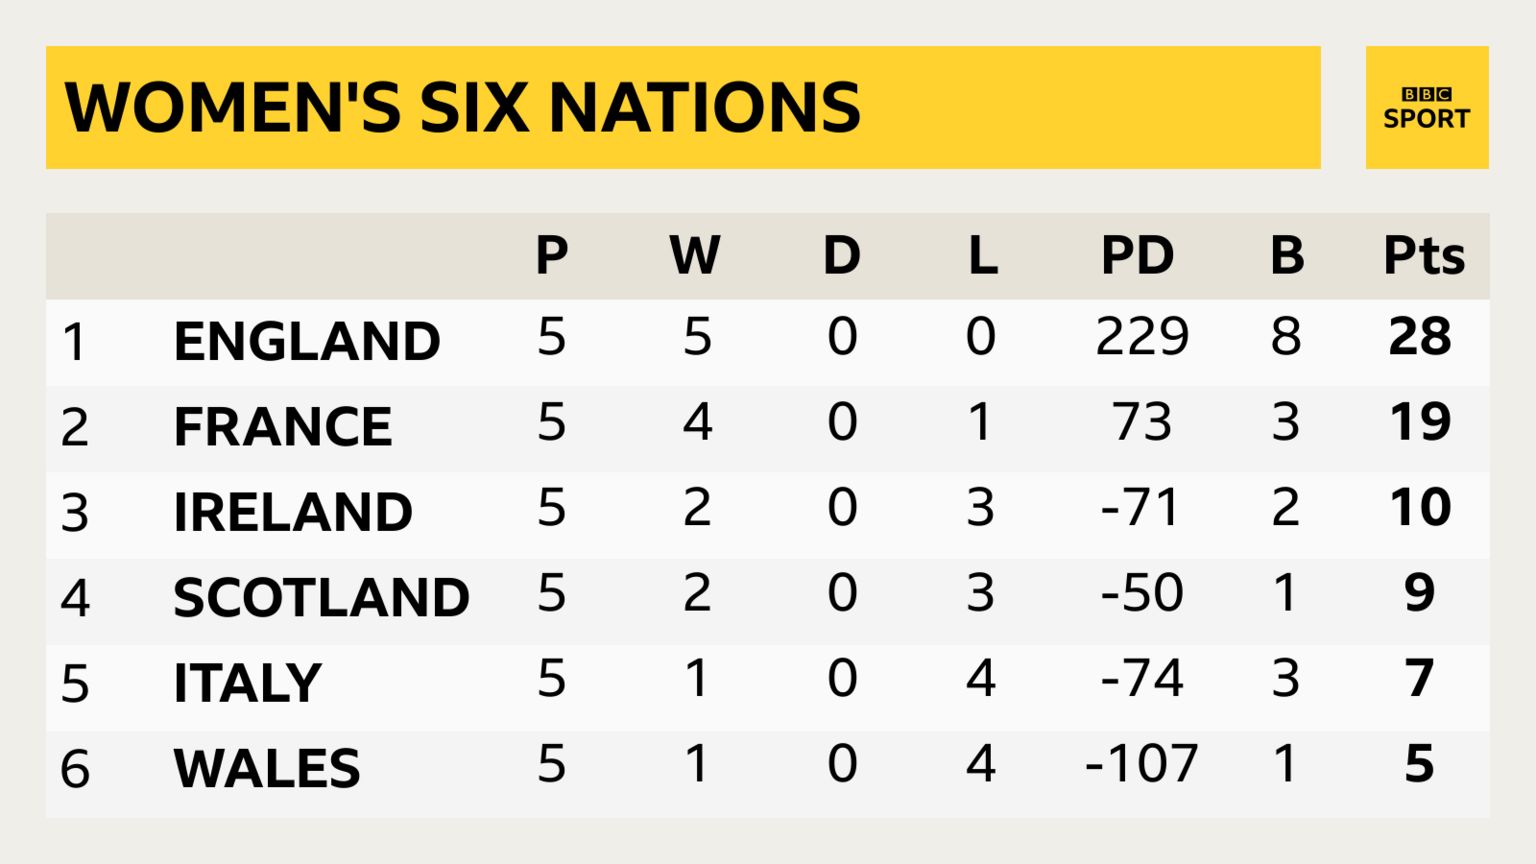 Women's Six Nations table - England secure